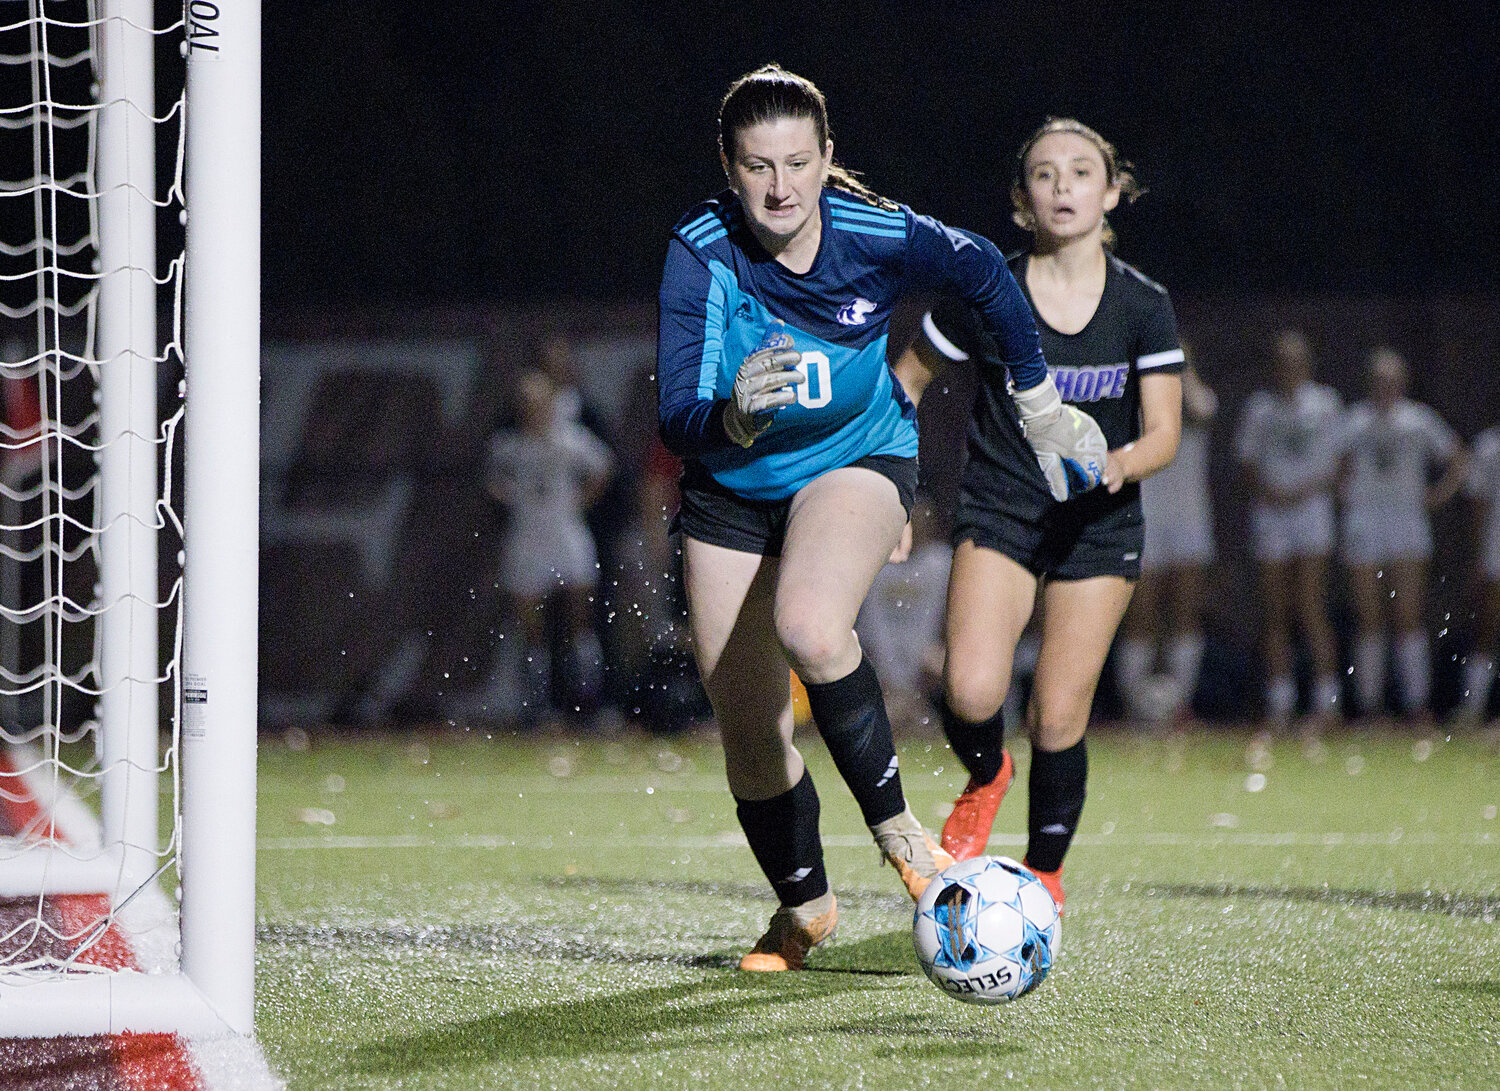 Goalkeeper Emily Moran races to stop a penalty shot in the final seconds of Tuesday's semifinal match against Chariho.